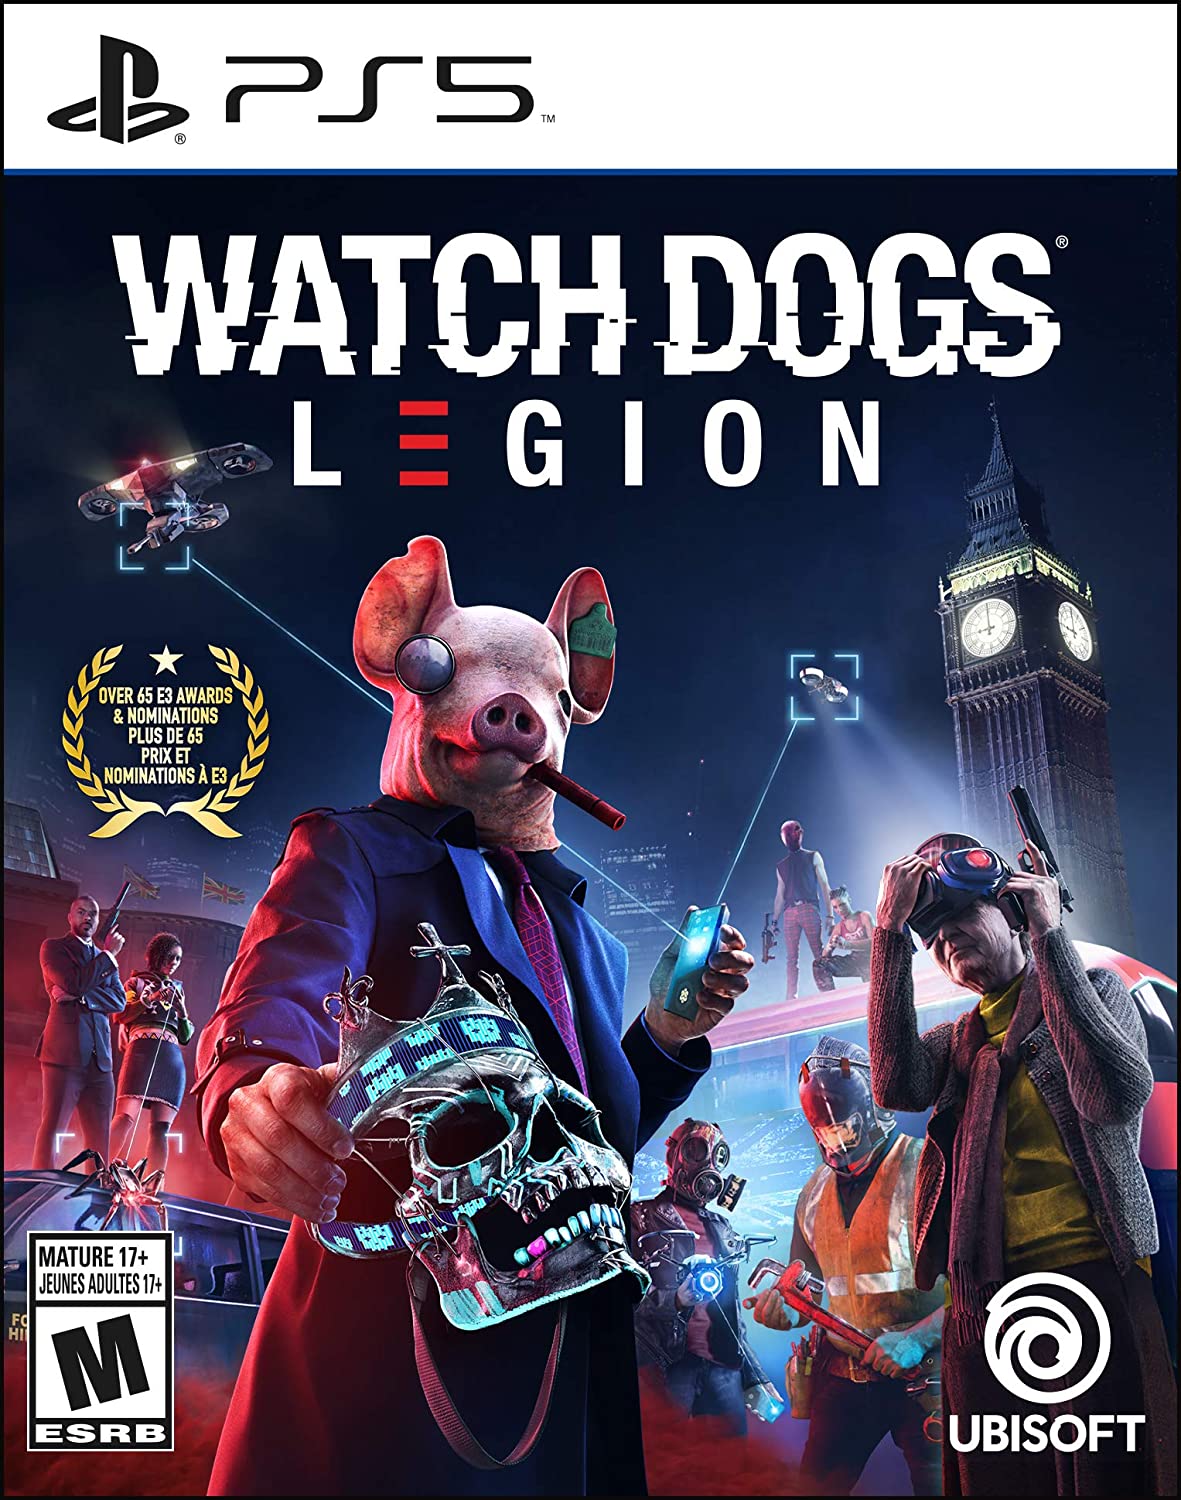 PS5 Game Watch Dogs Lgion, SON-WATCH